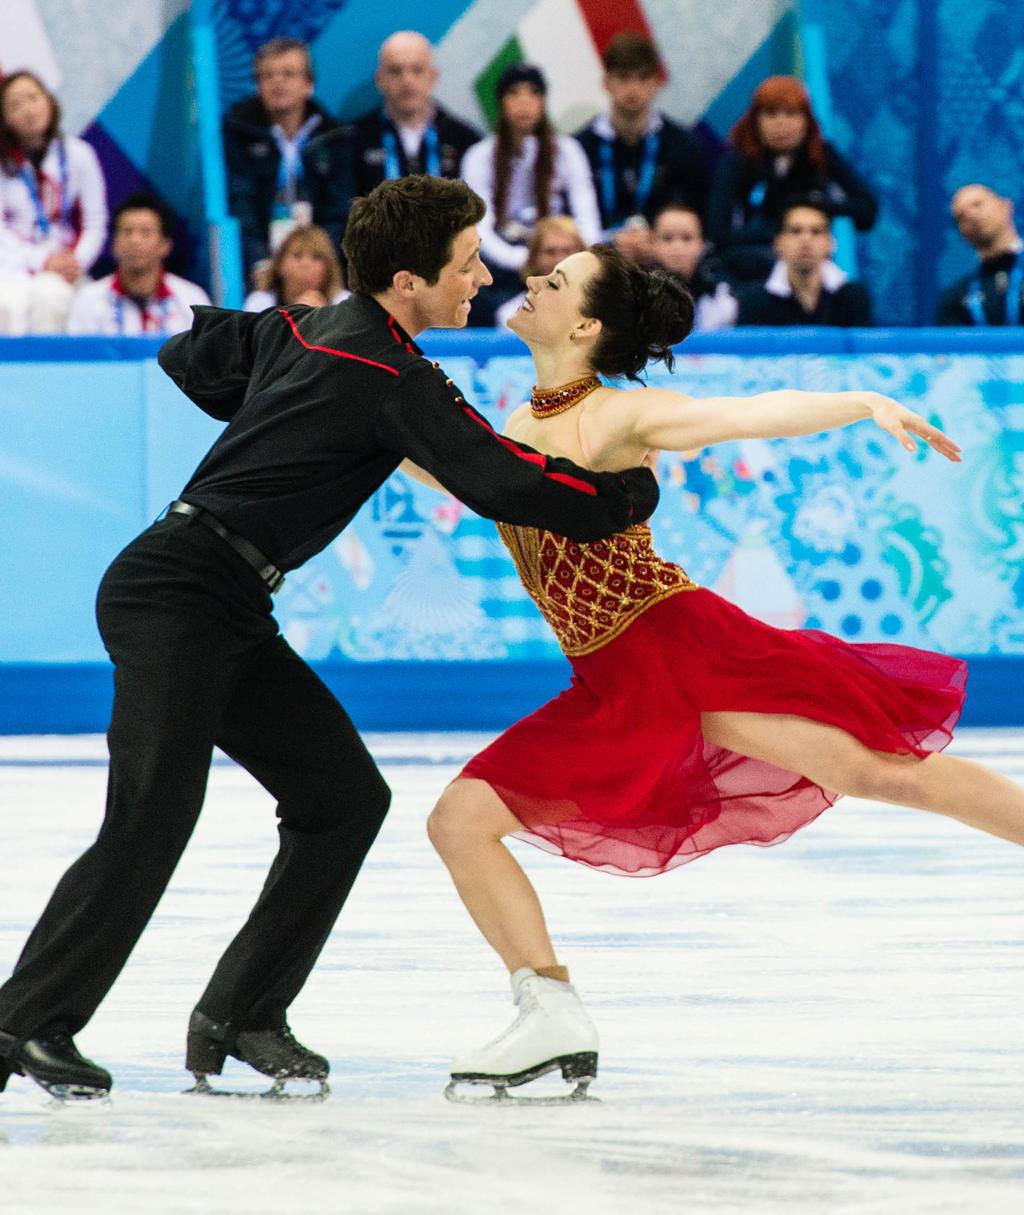 TESSA VIRTUE AND SCOTT MOIR SOCHI 2014 As they grew up, they became very good friends. They pushed each other to work harder. The sacrifices were huge for both skaters, but they were a team.